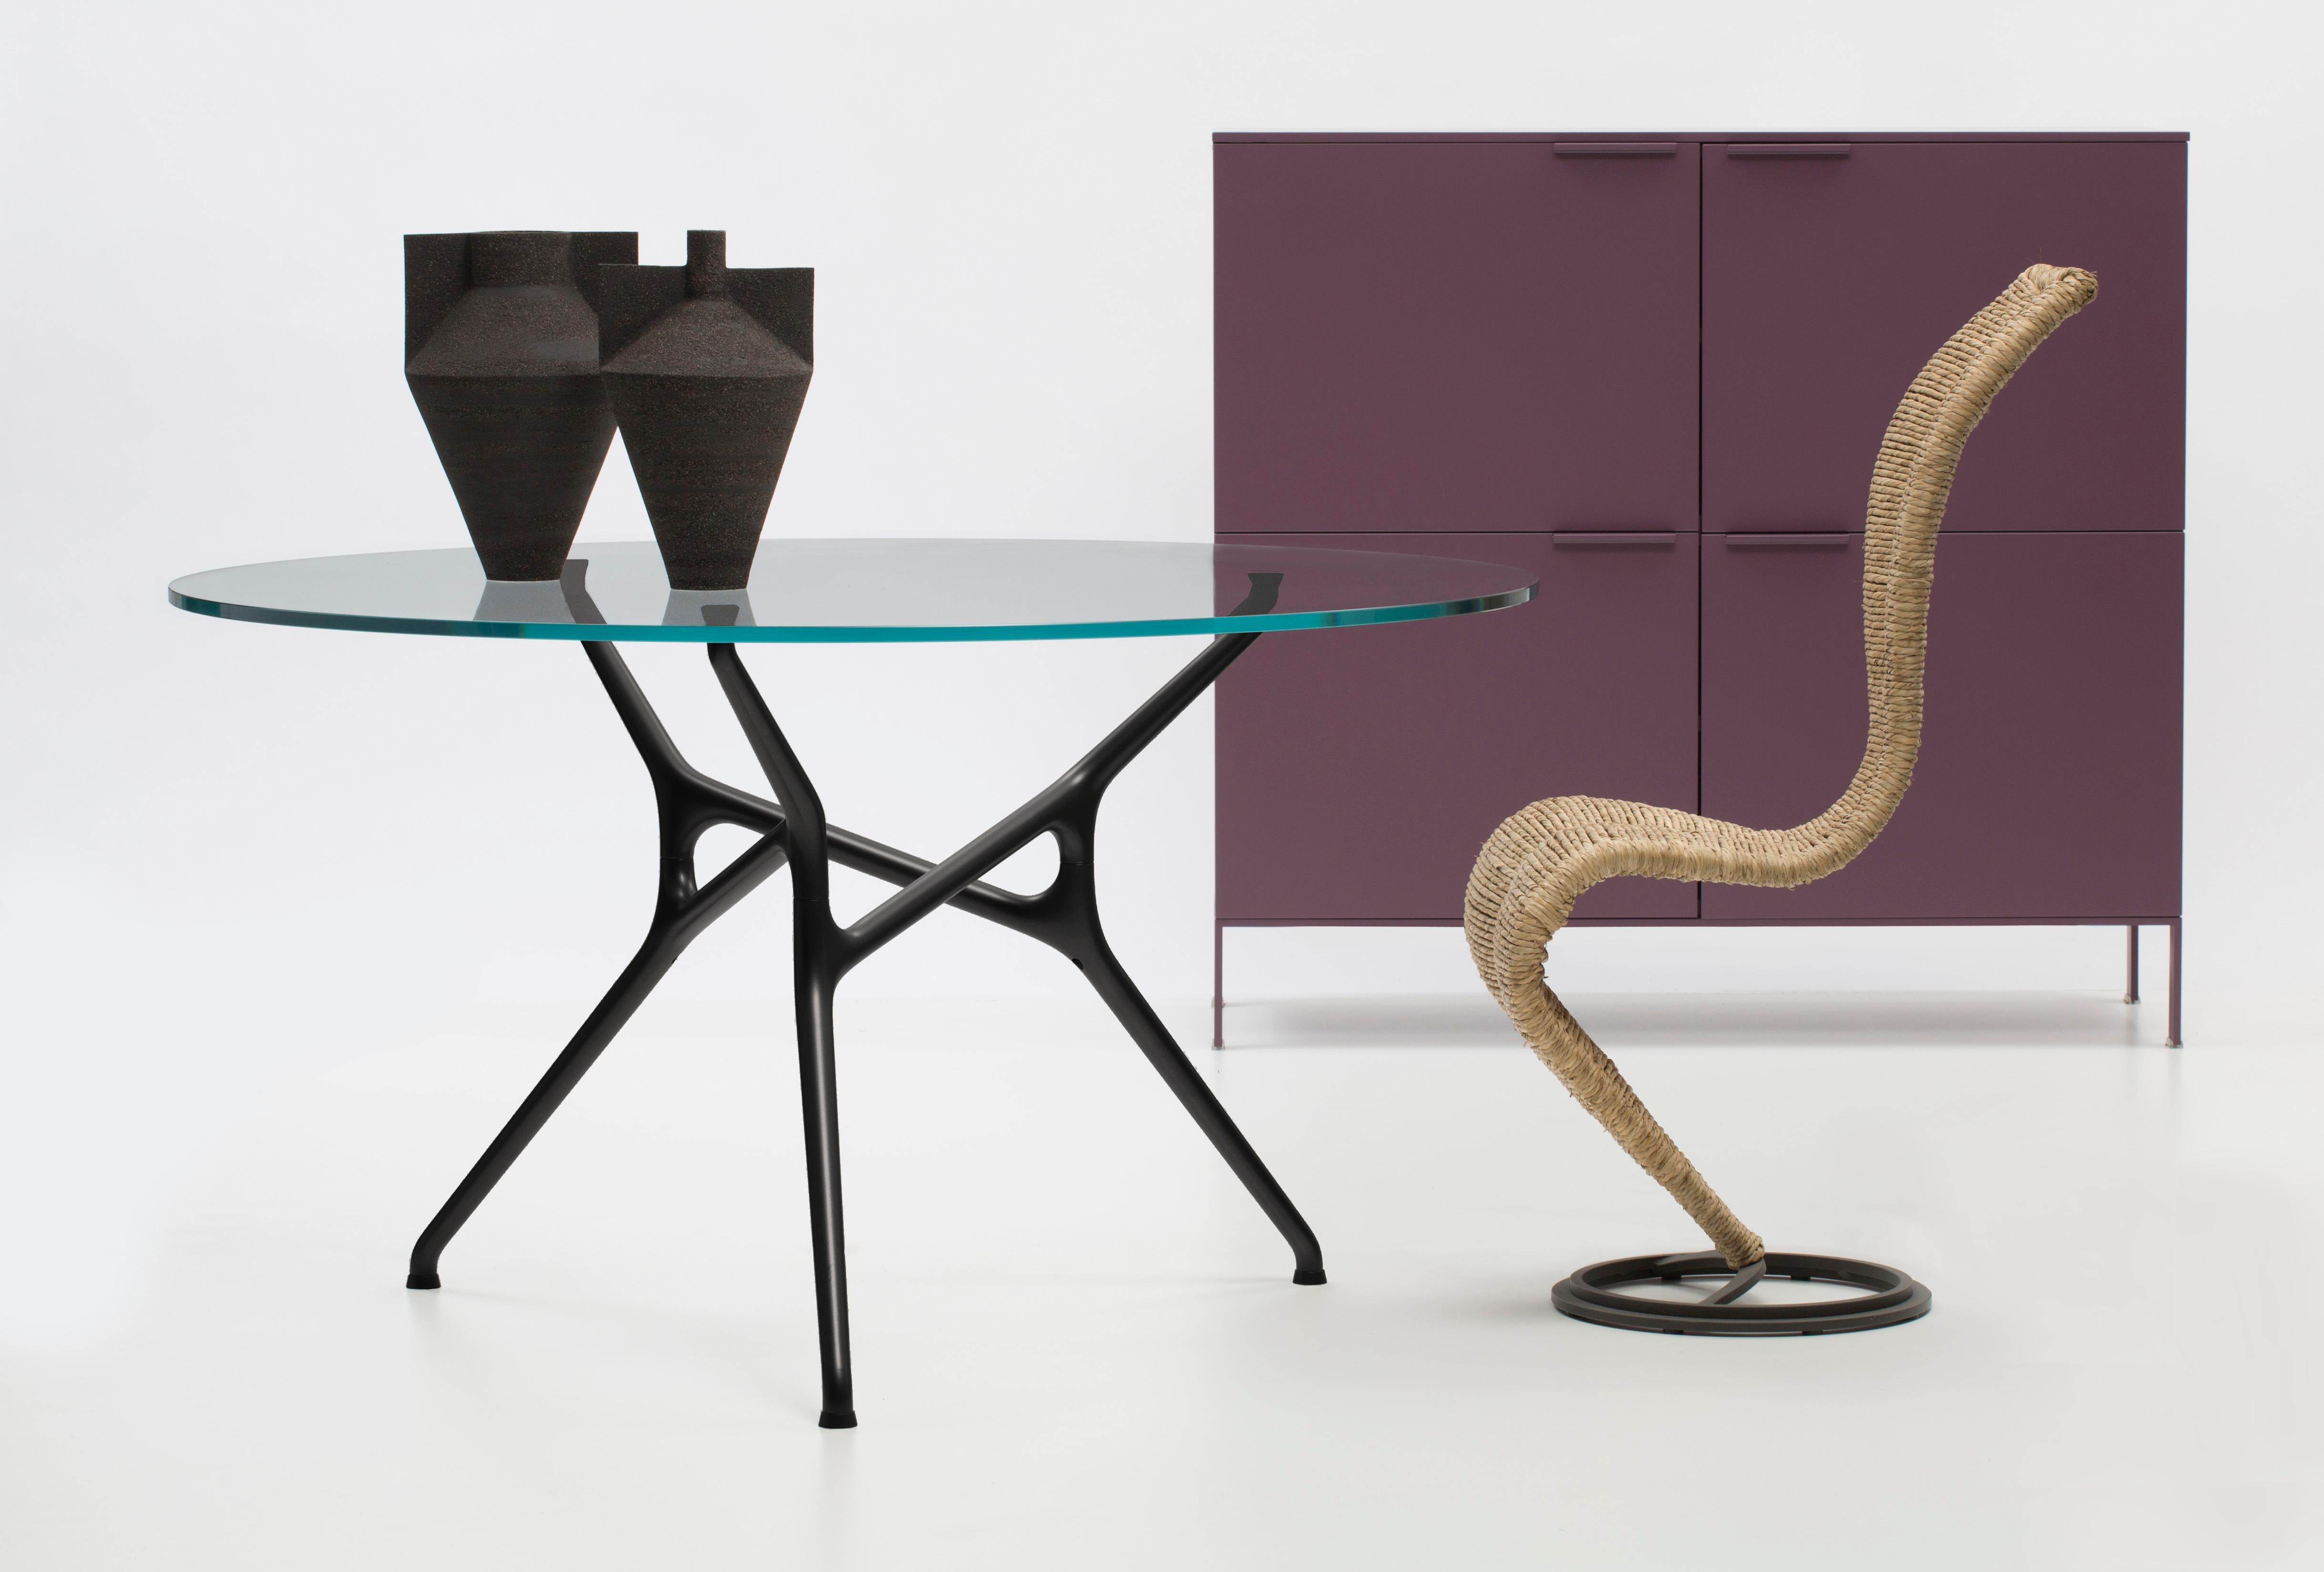 The structure of the Branch Table is composed of identical ramified elements made of die-cast aluminum: for this product, designer Jakob Wagner created a series of seamlessly interconnecting elements in continuous movement, resulting in a base that